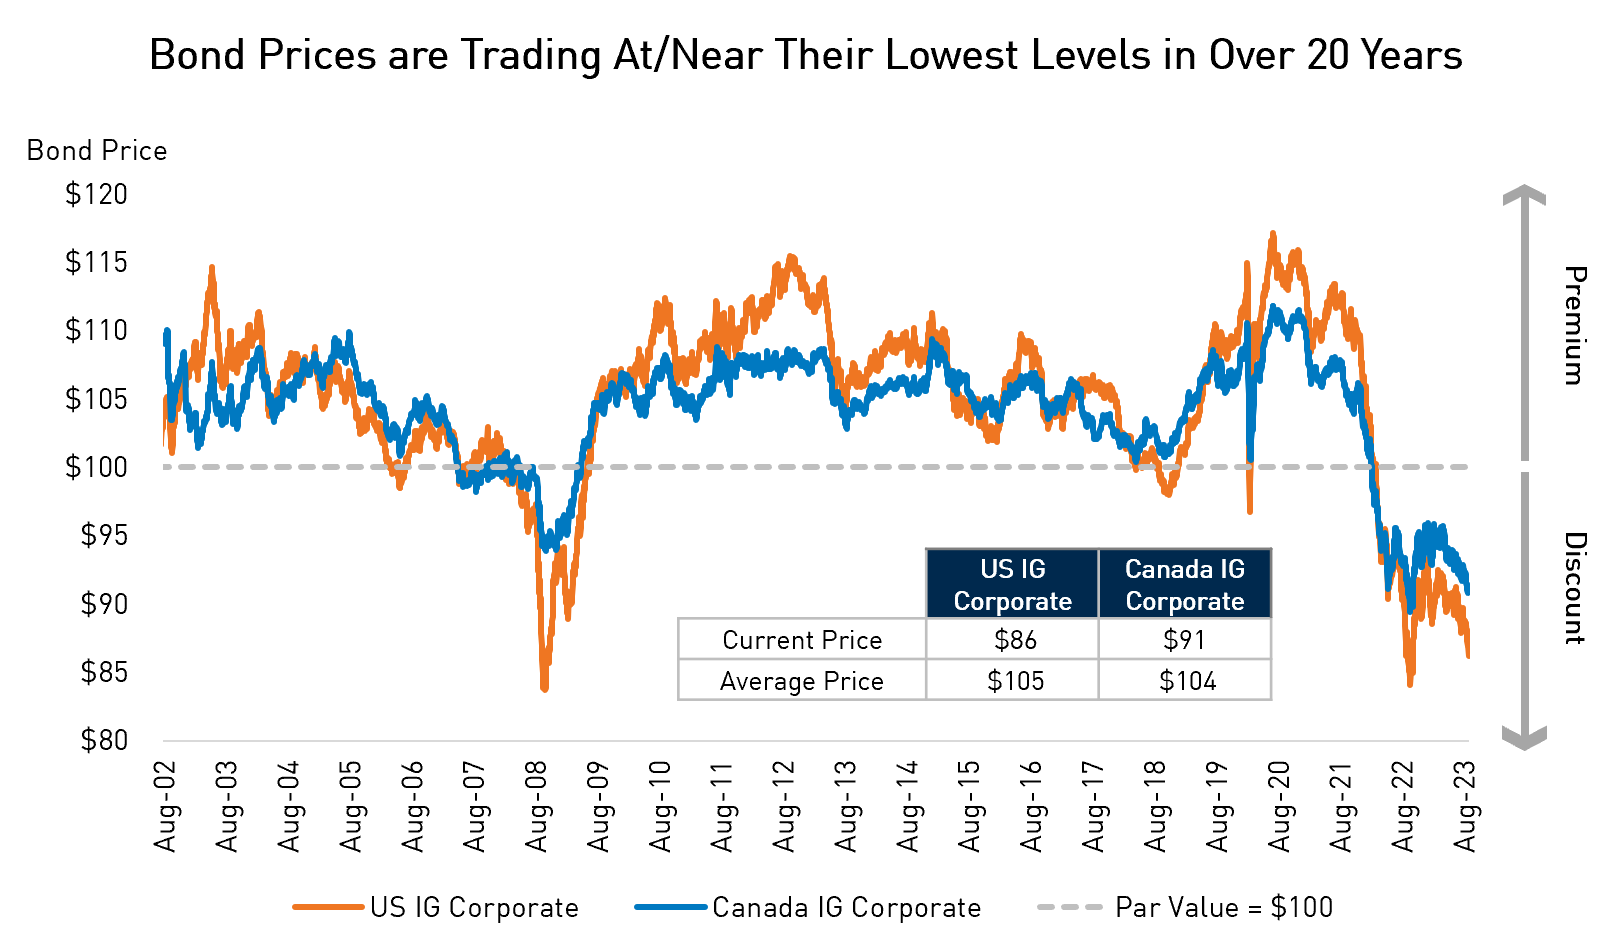 Chart showing that bond prices are trading at/near their lowest levels in over 20 years